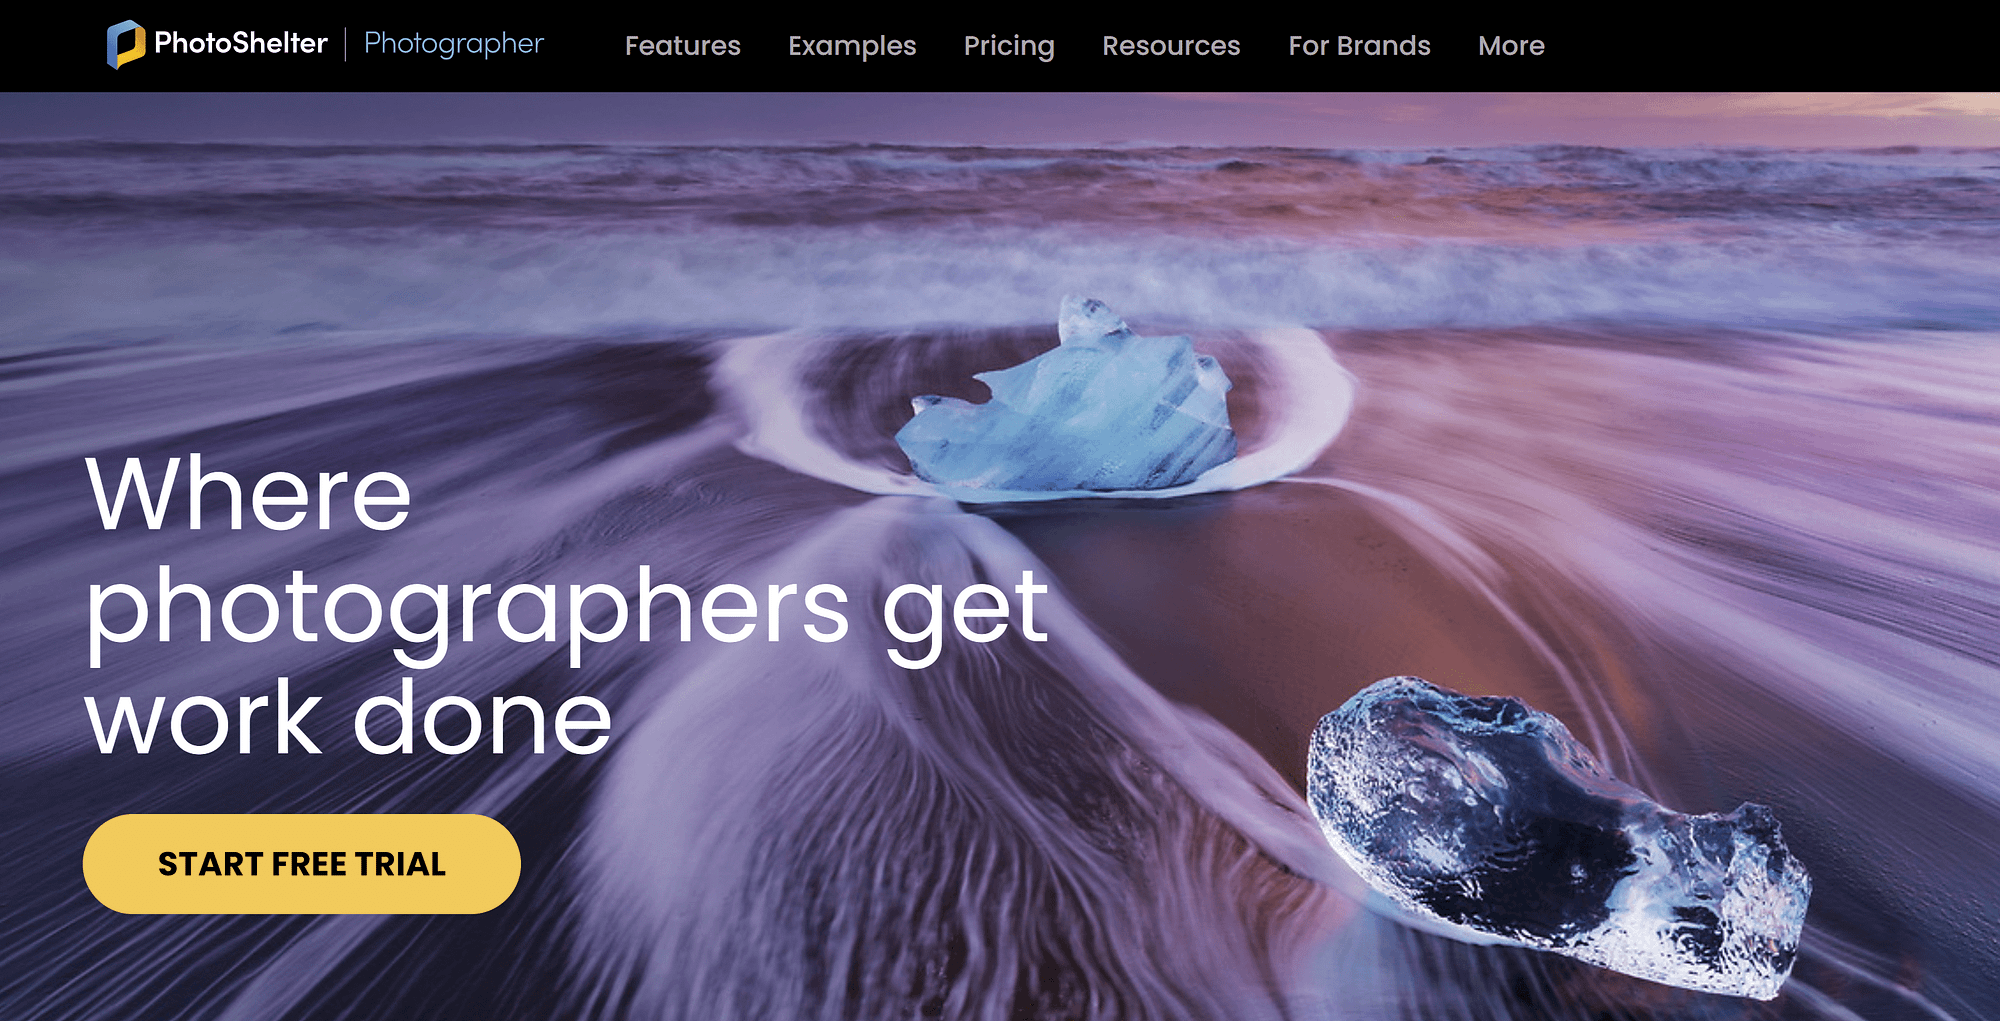 One of the options for best site builder for photographers, PhotoShelter.